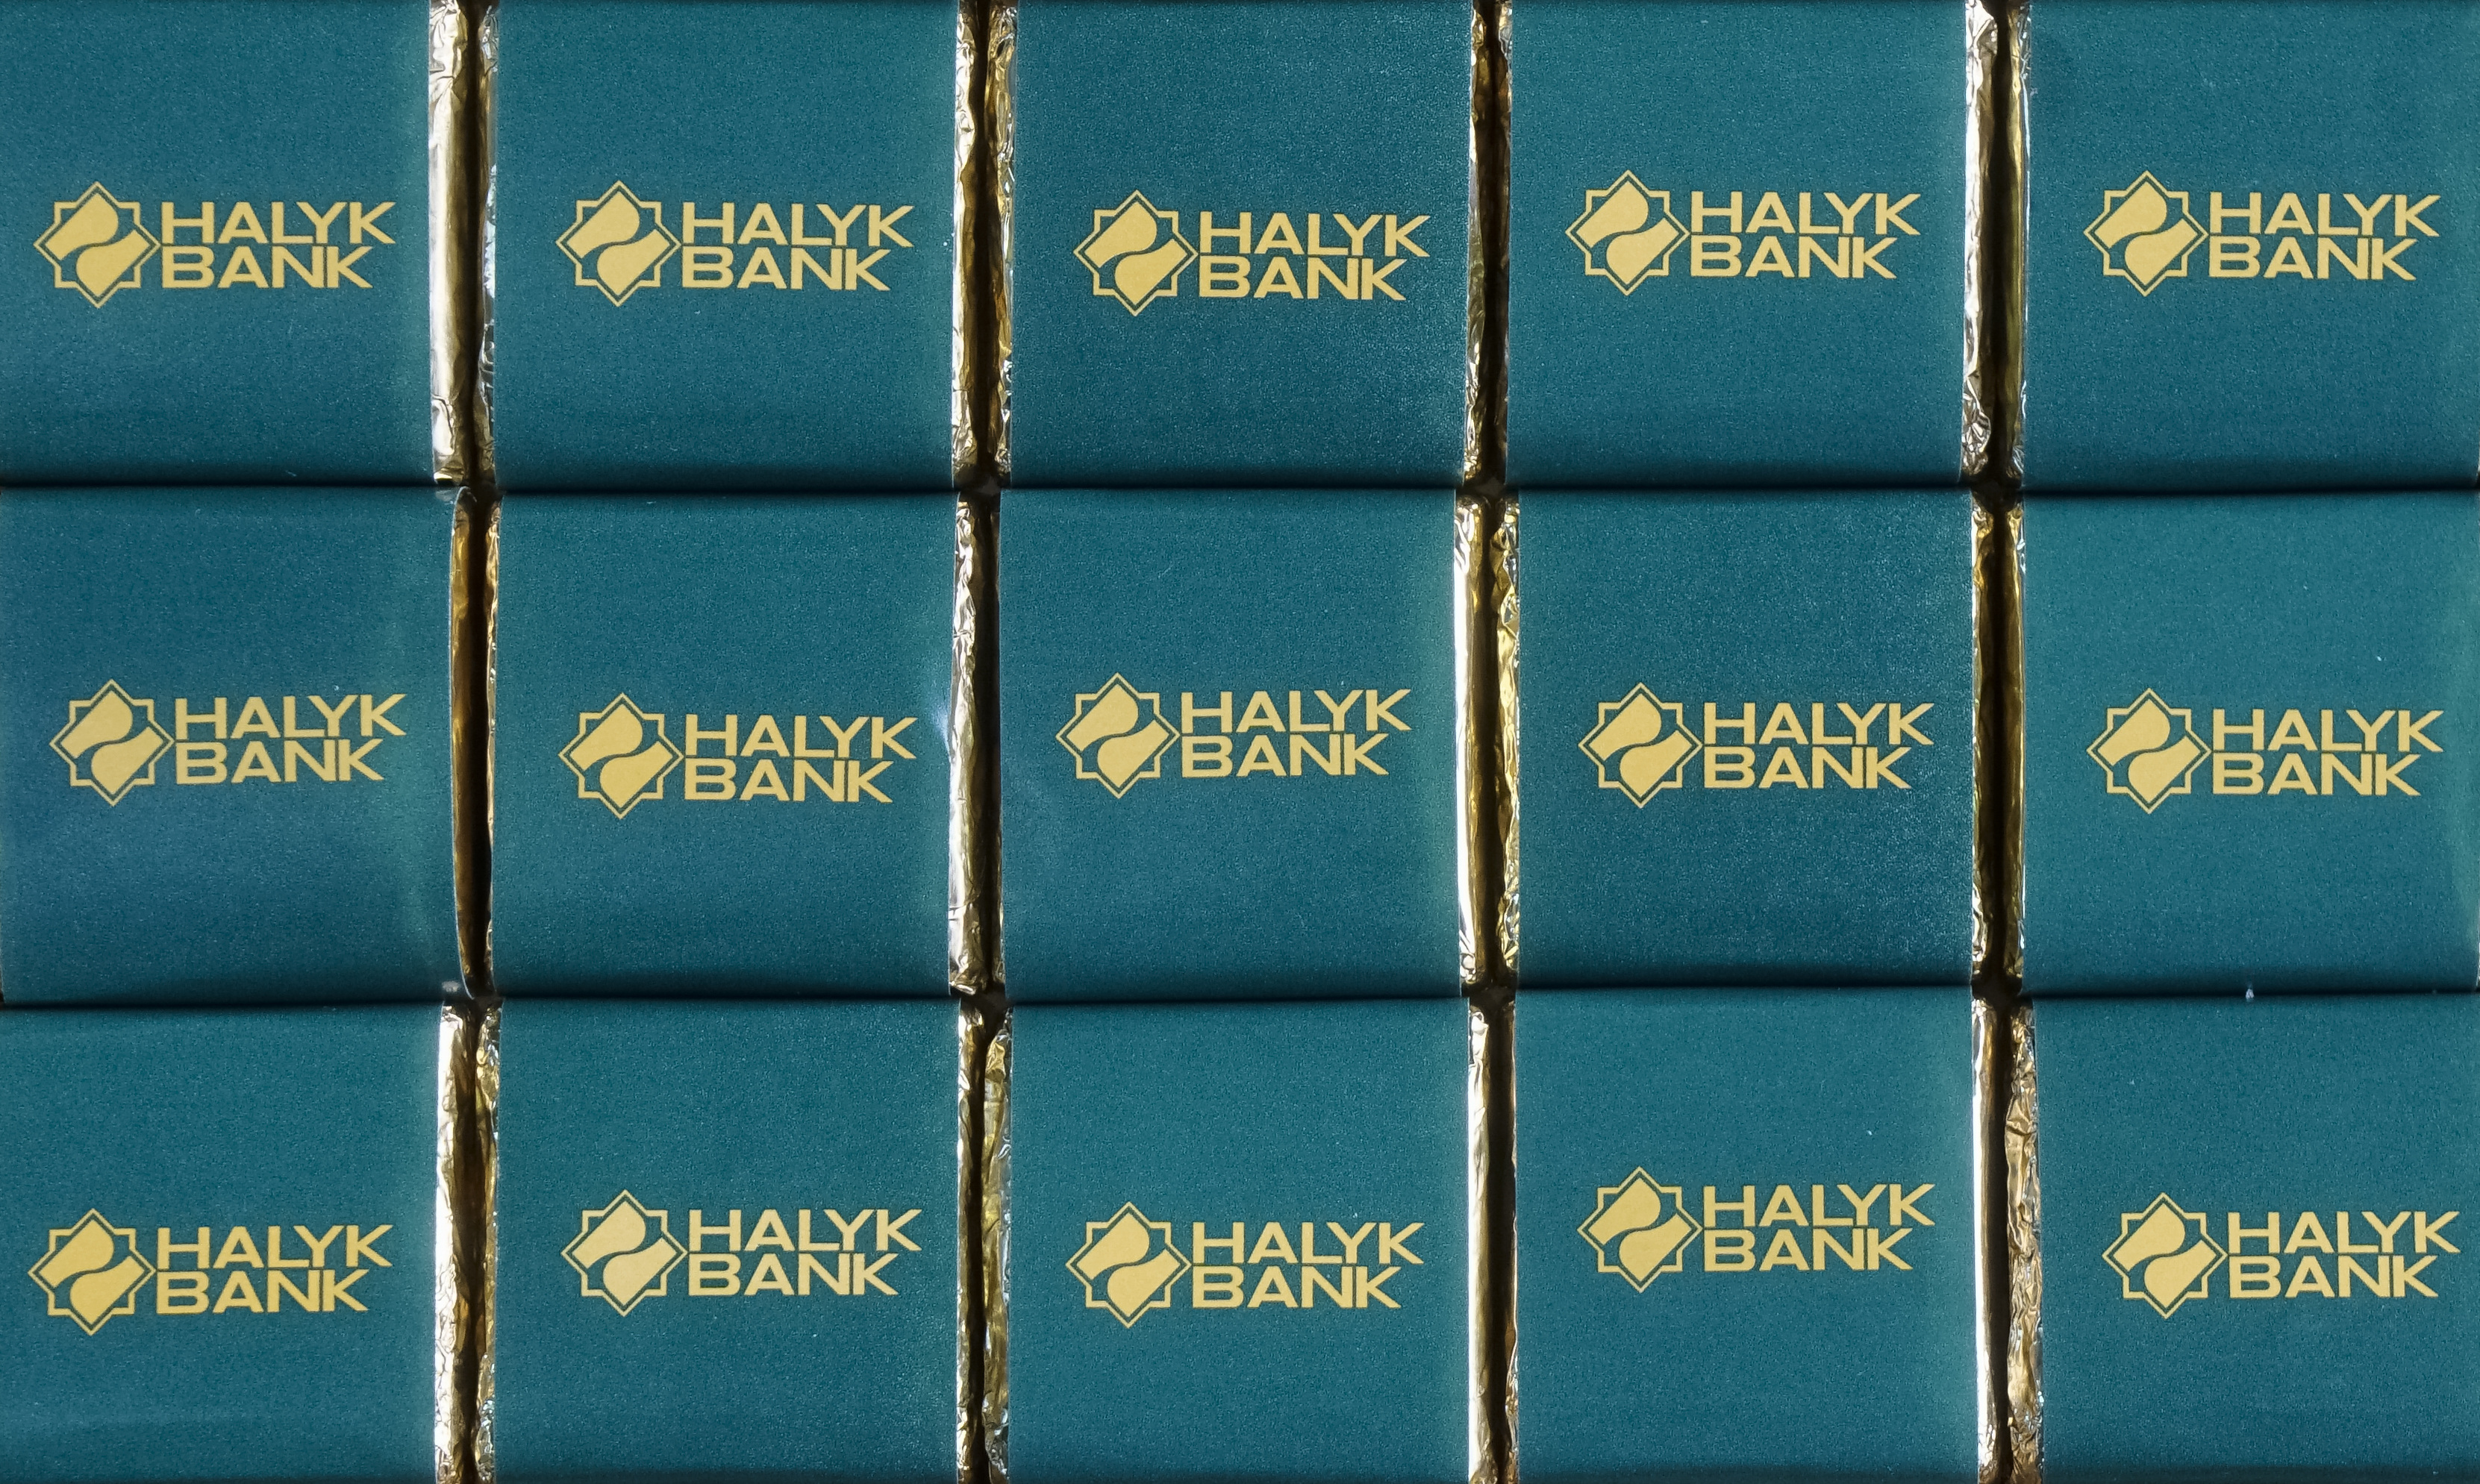 The logo of Halyk Bank is seen on the wrapping of promotional chocolate bars in Almaty